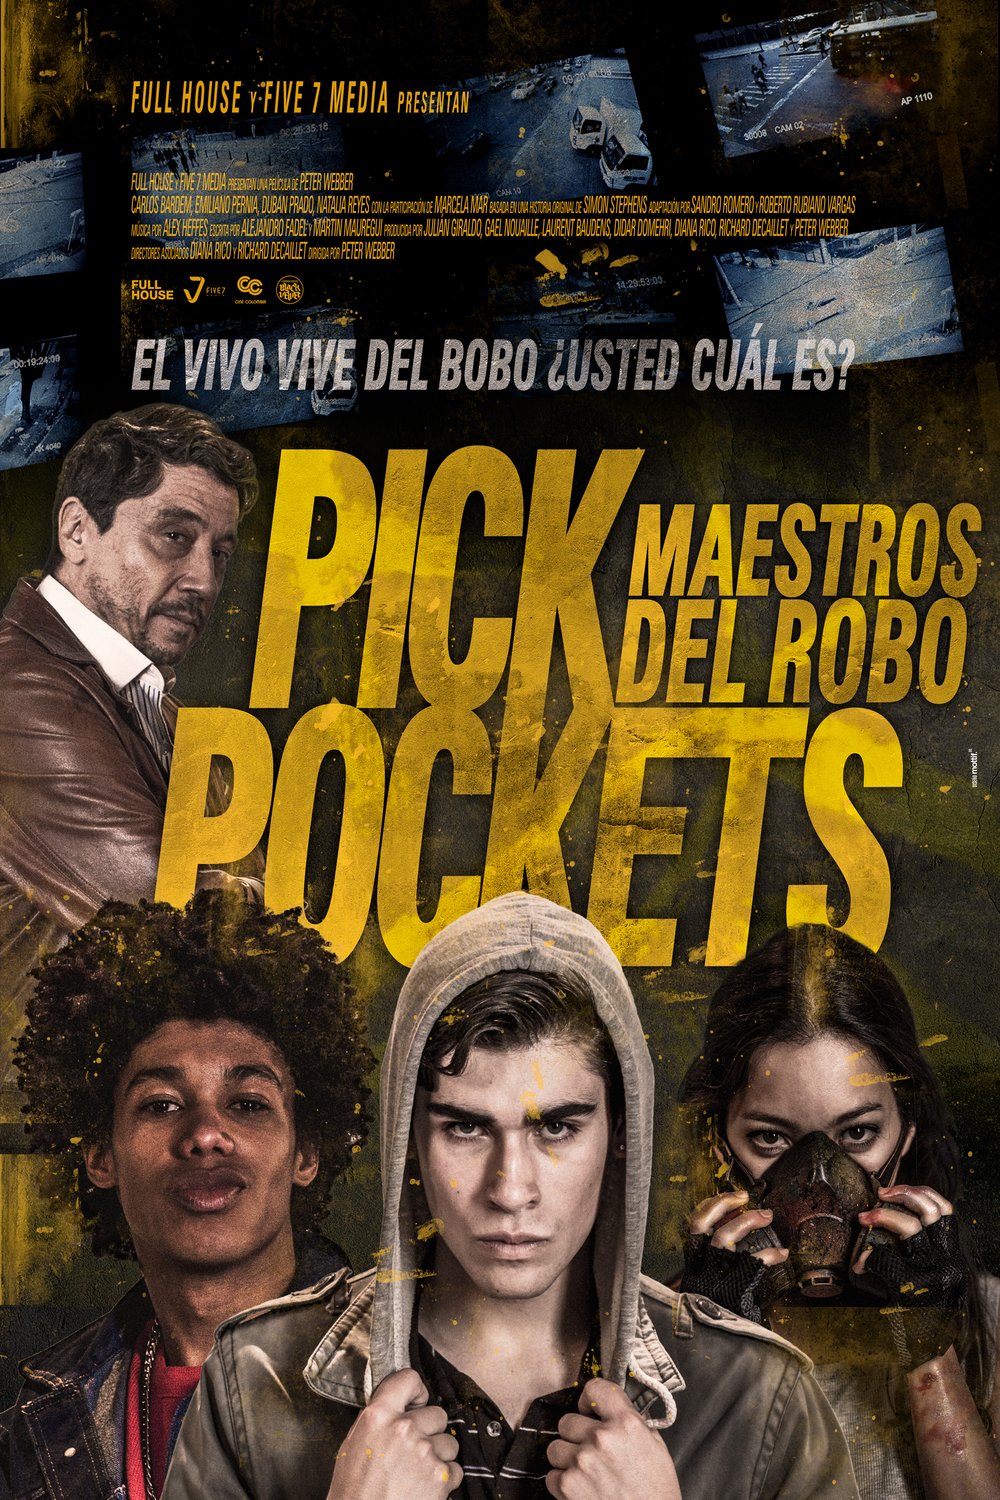 Spanish poster of the movie Pickpockets: Maestros del robo